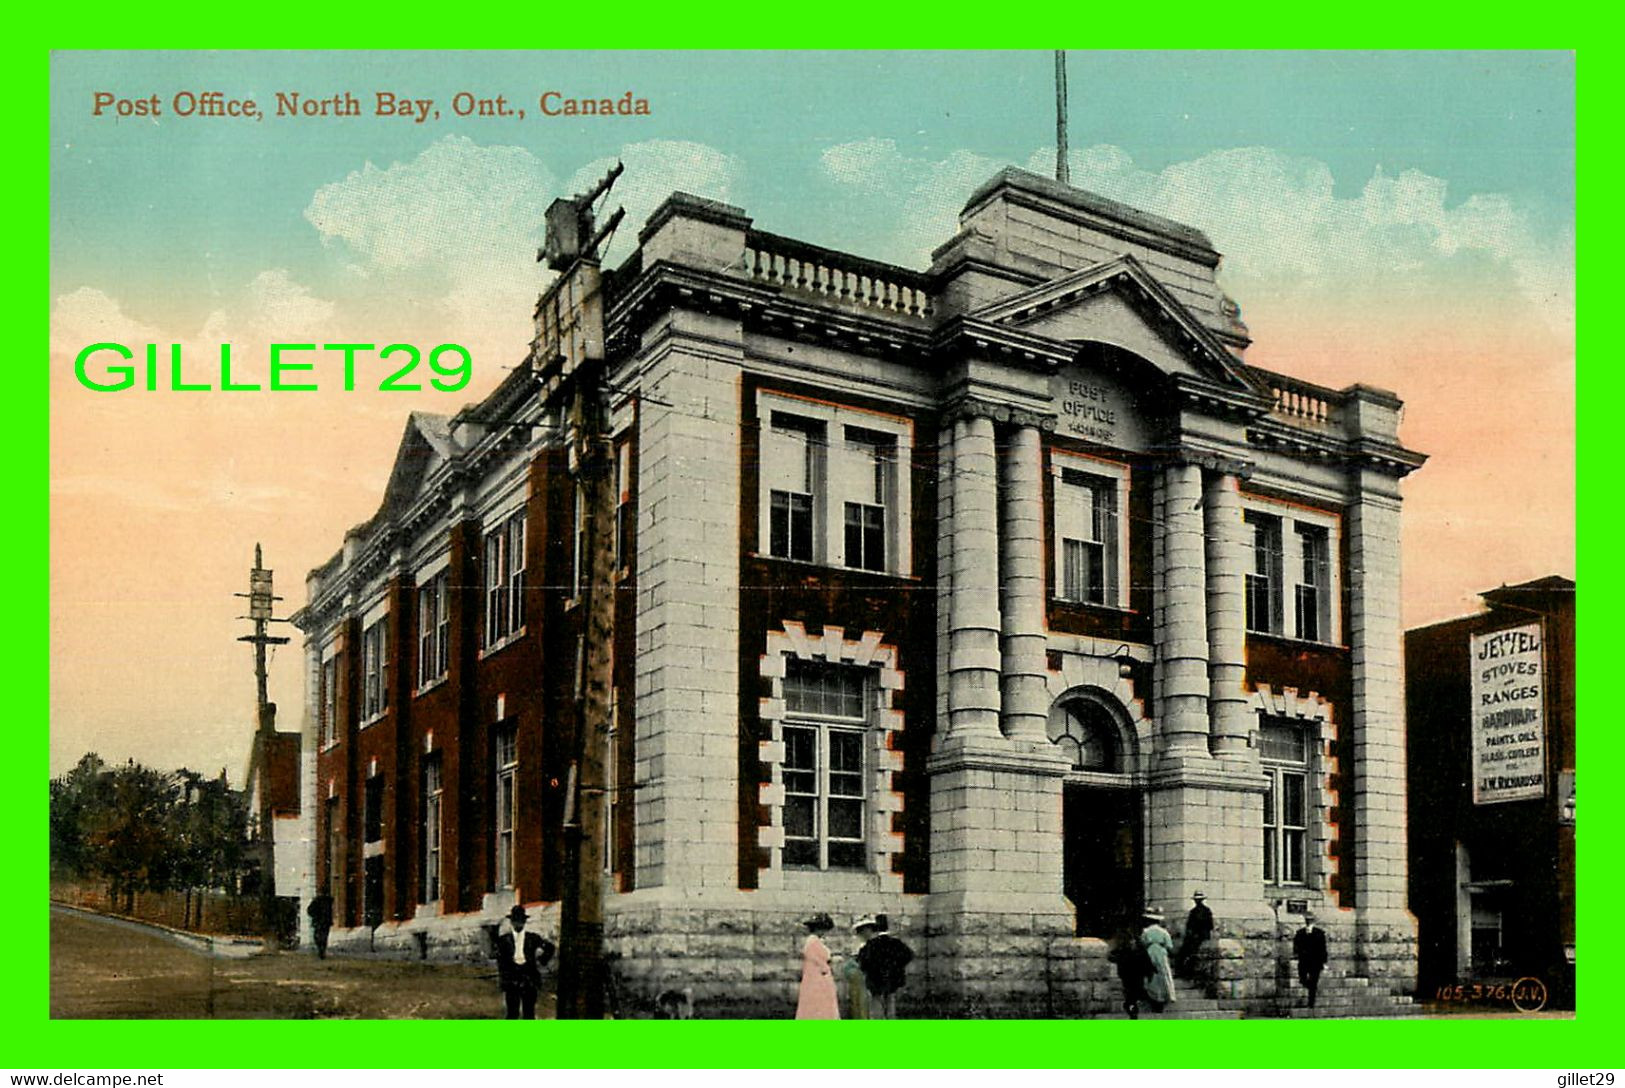 NORTH BAY, ONTARIO - POST OFFICE - TRAVEL IN 1912 - ANIMATED WITH PEOPLES - THE VALENTINE & SONS PUB - - North Bay